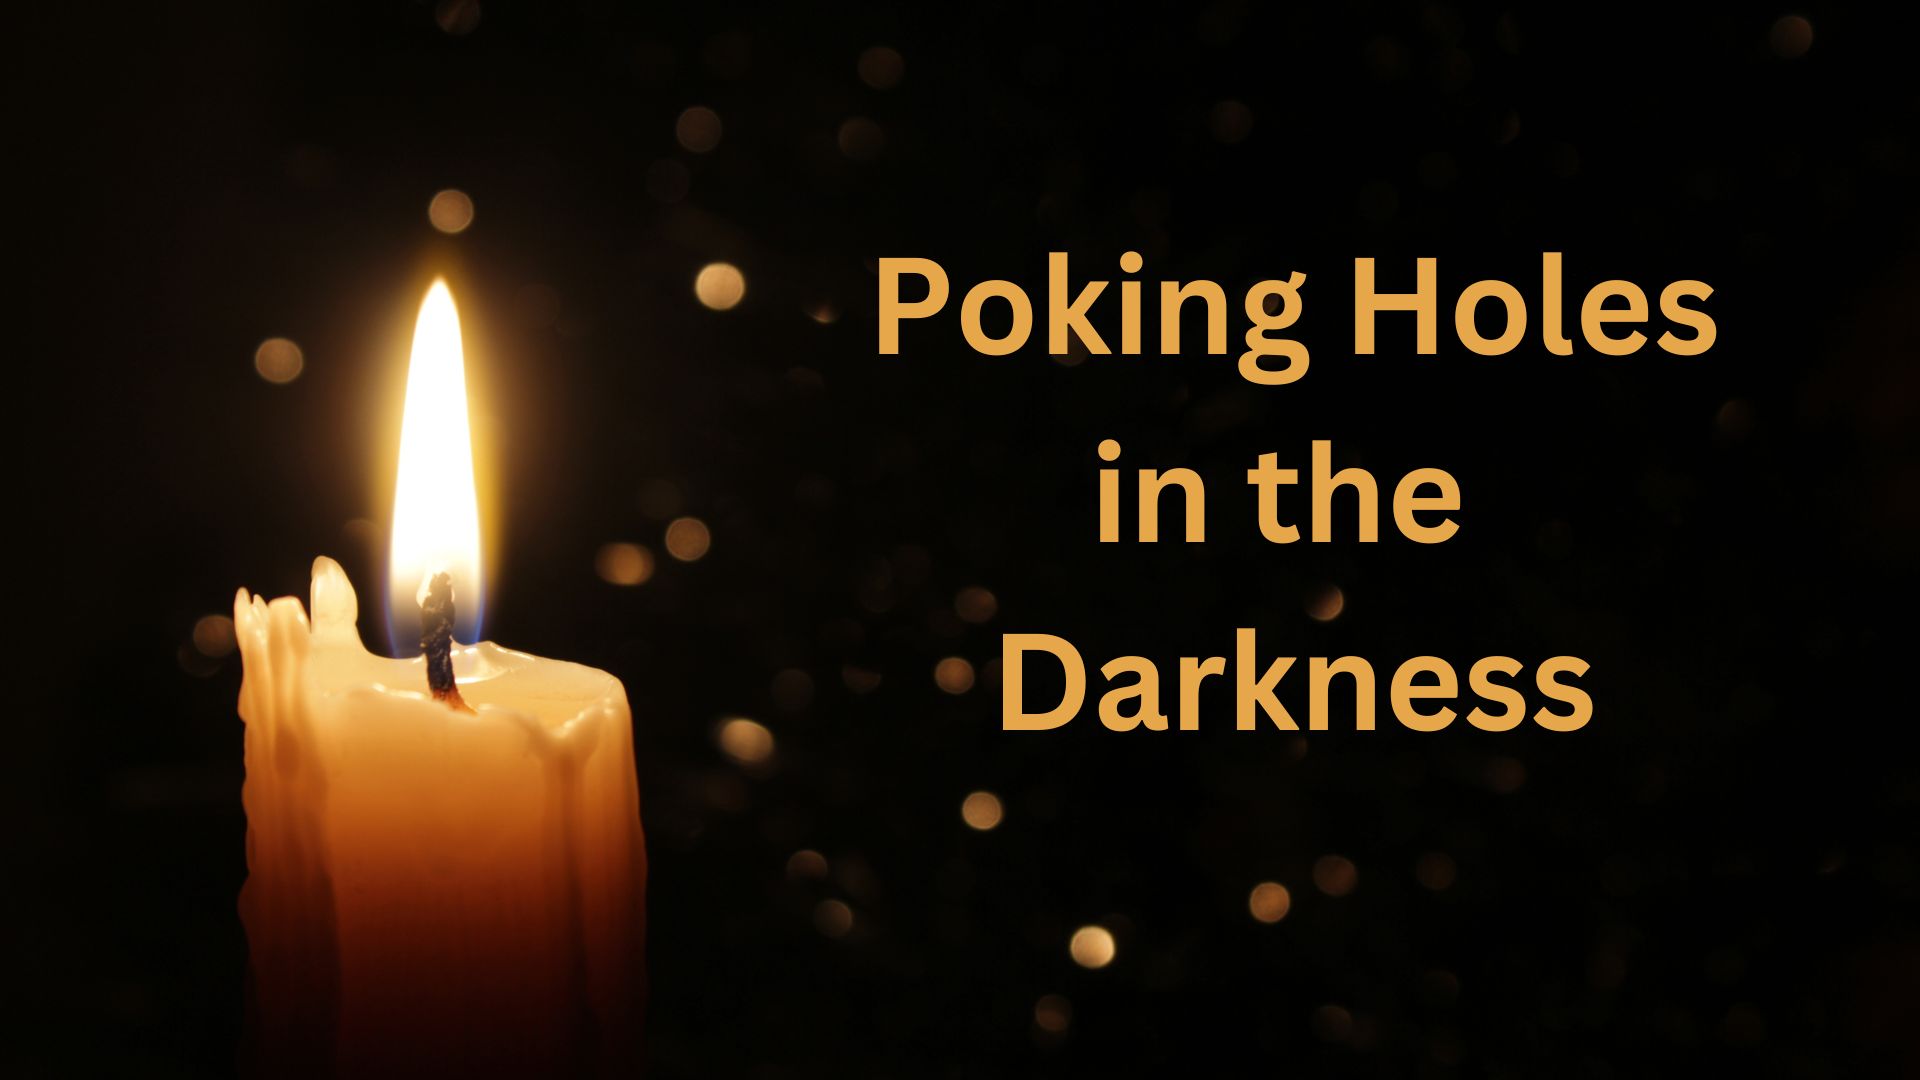 Poking Holes in the Darkness - Adobe Stock